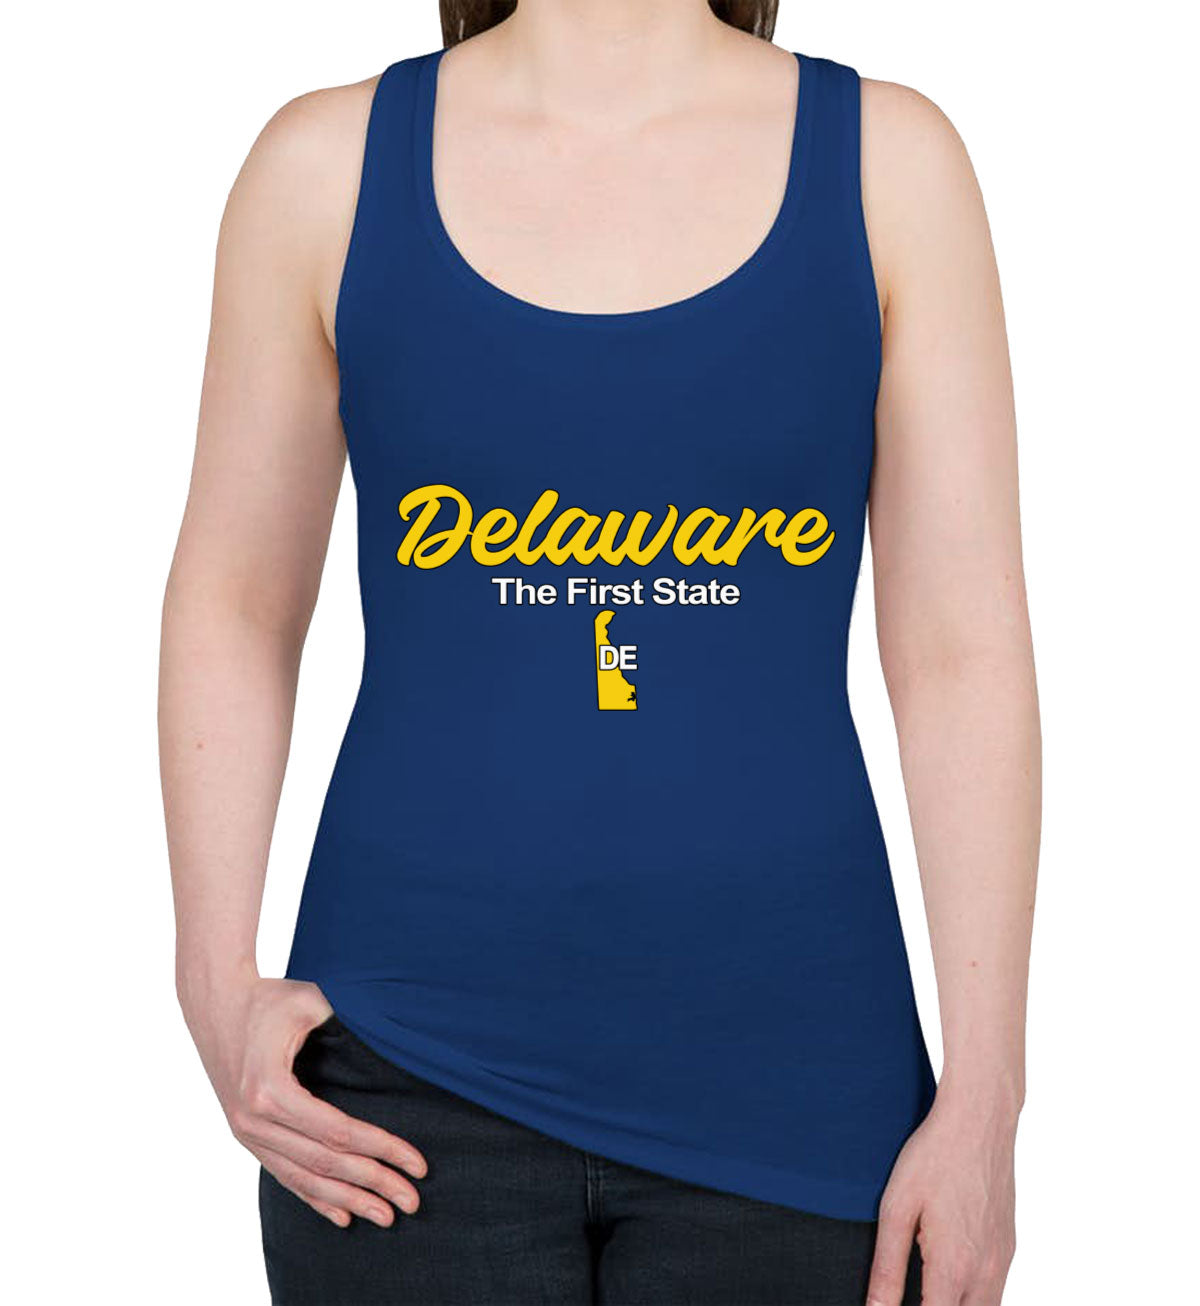 Delaware The First State Women's Racerback Tank Top